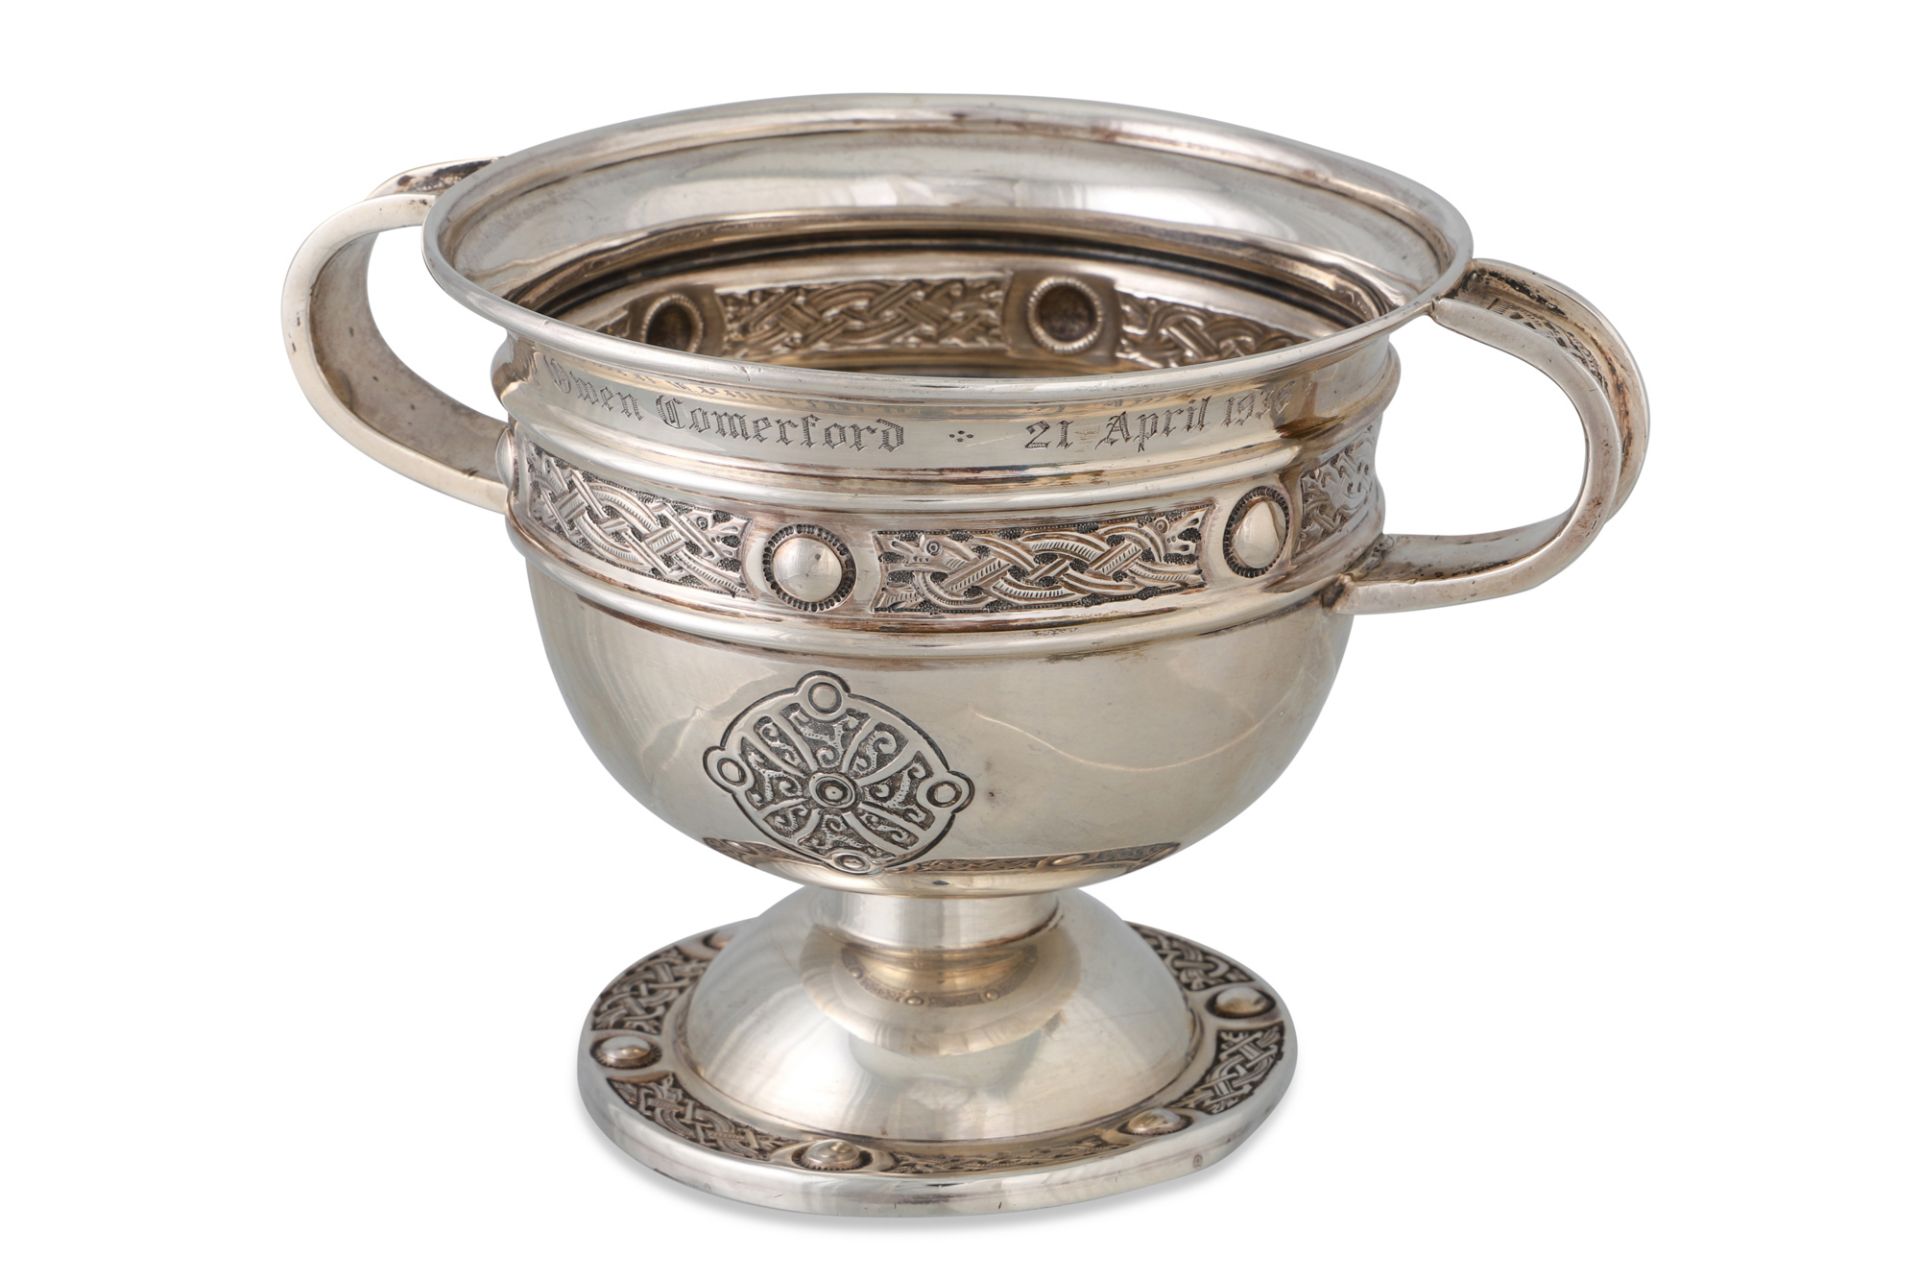 A PRE-WAR IRISH SILVER TWO HANDLE CELTIC STYLE CUP, in the manner of the Ardagh chalice, Dublin